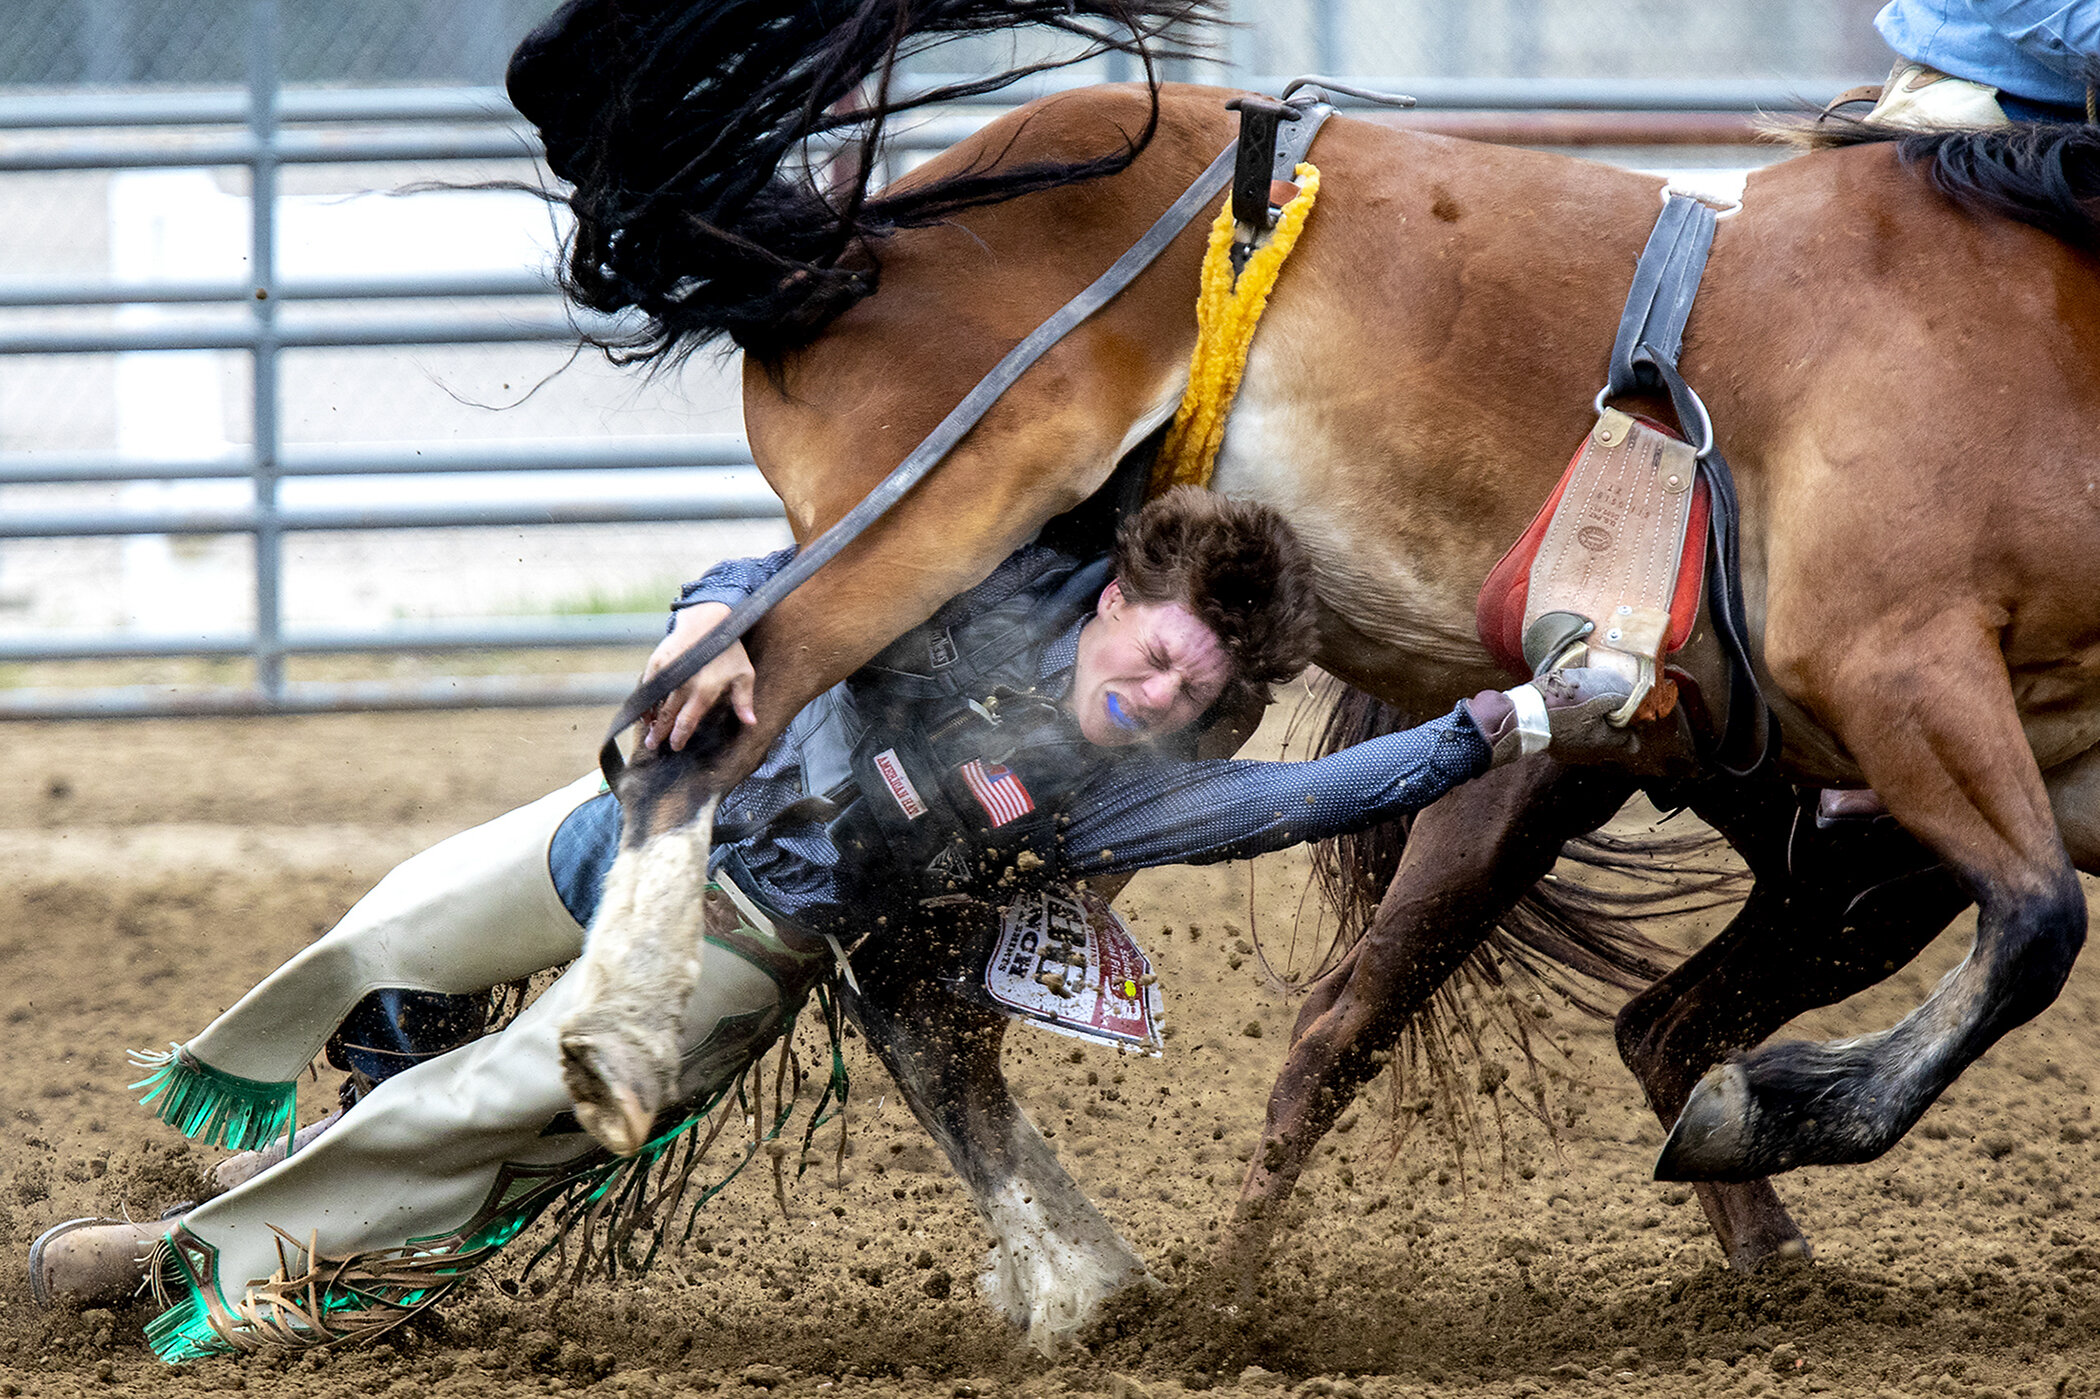  Drake Amundson, of Wheatland, gets his hand caught and is dragged under the hooves of his horse during the bareback competition of the Wyoming State Rodeo High School Finals on Saturday, June 8, 2019. EMS crews attended to Amundson who was able to s